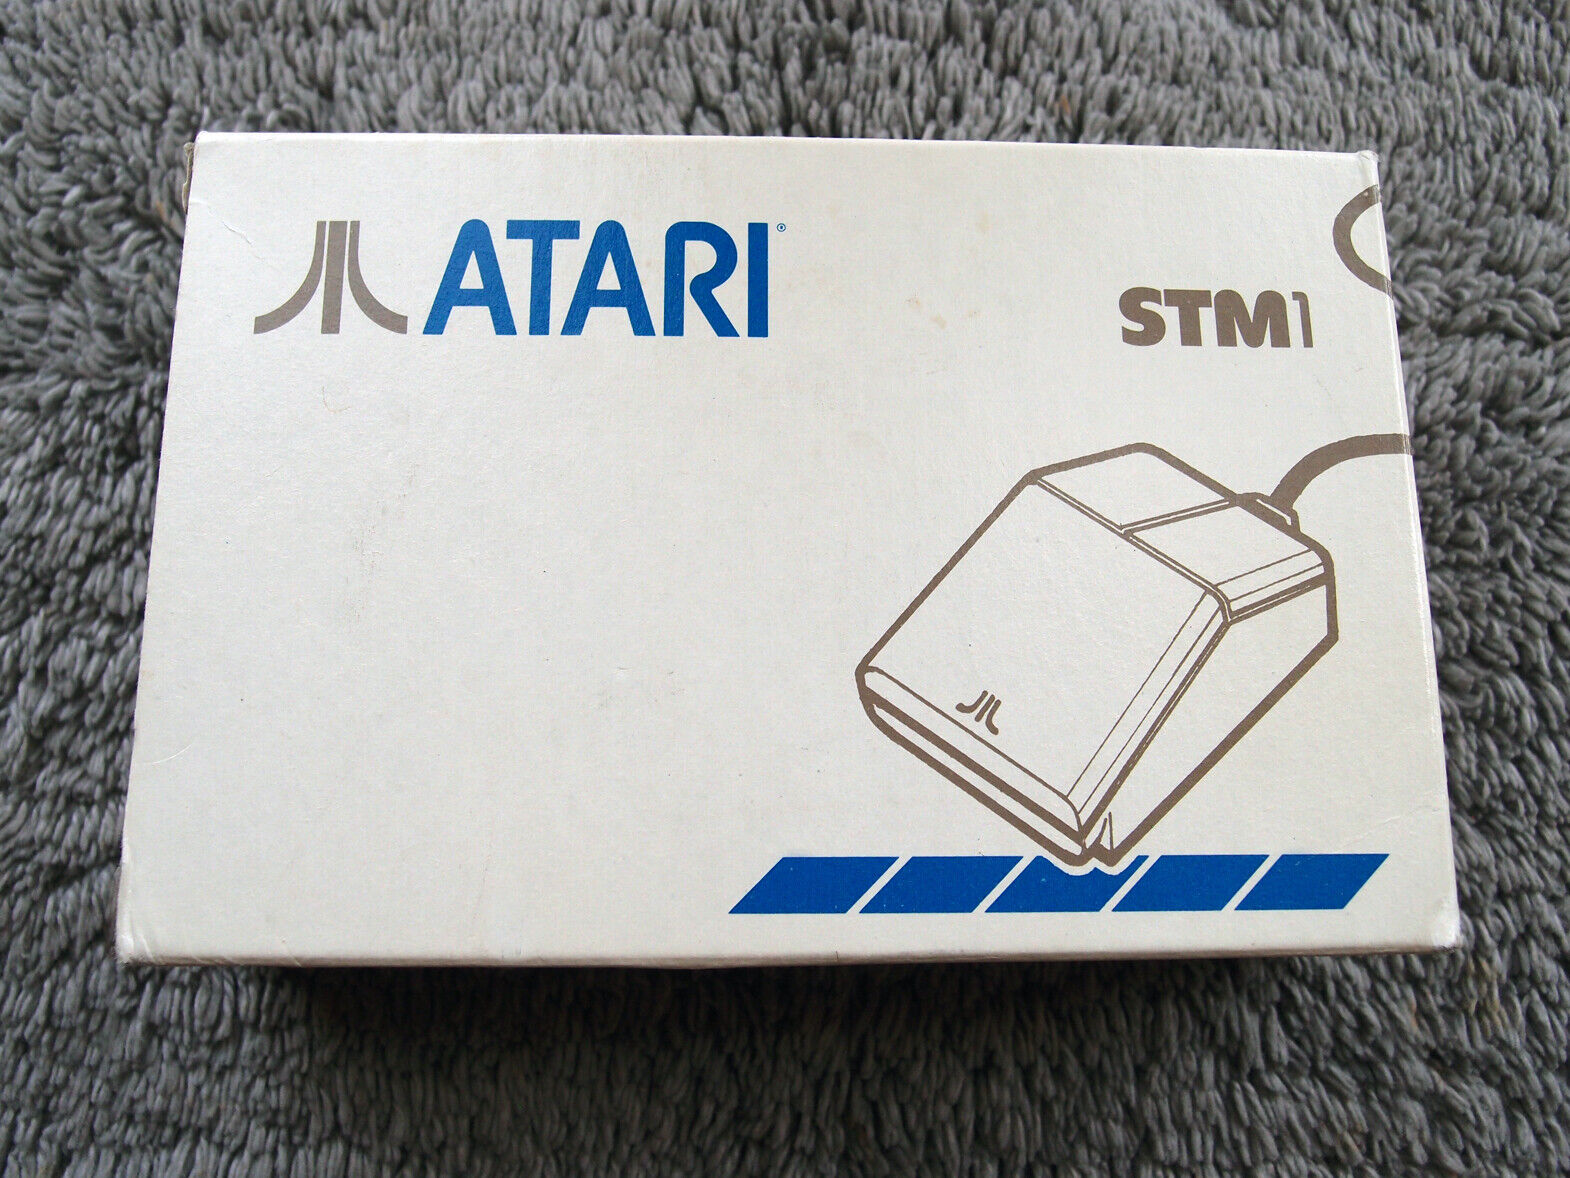 Brand New, Collectable Atari STM1 Mouse in original packaging